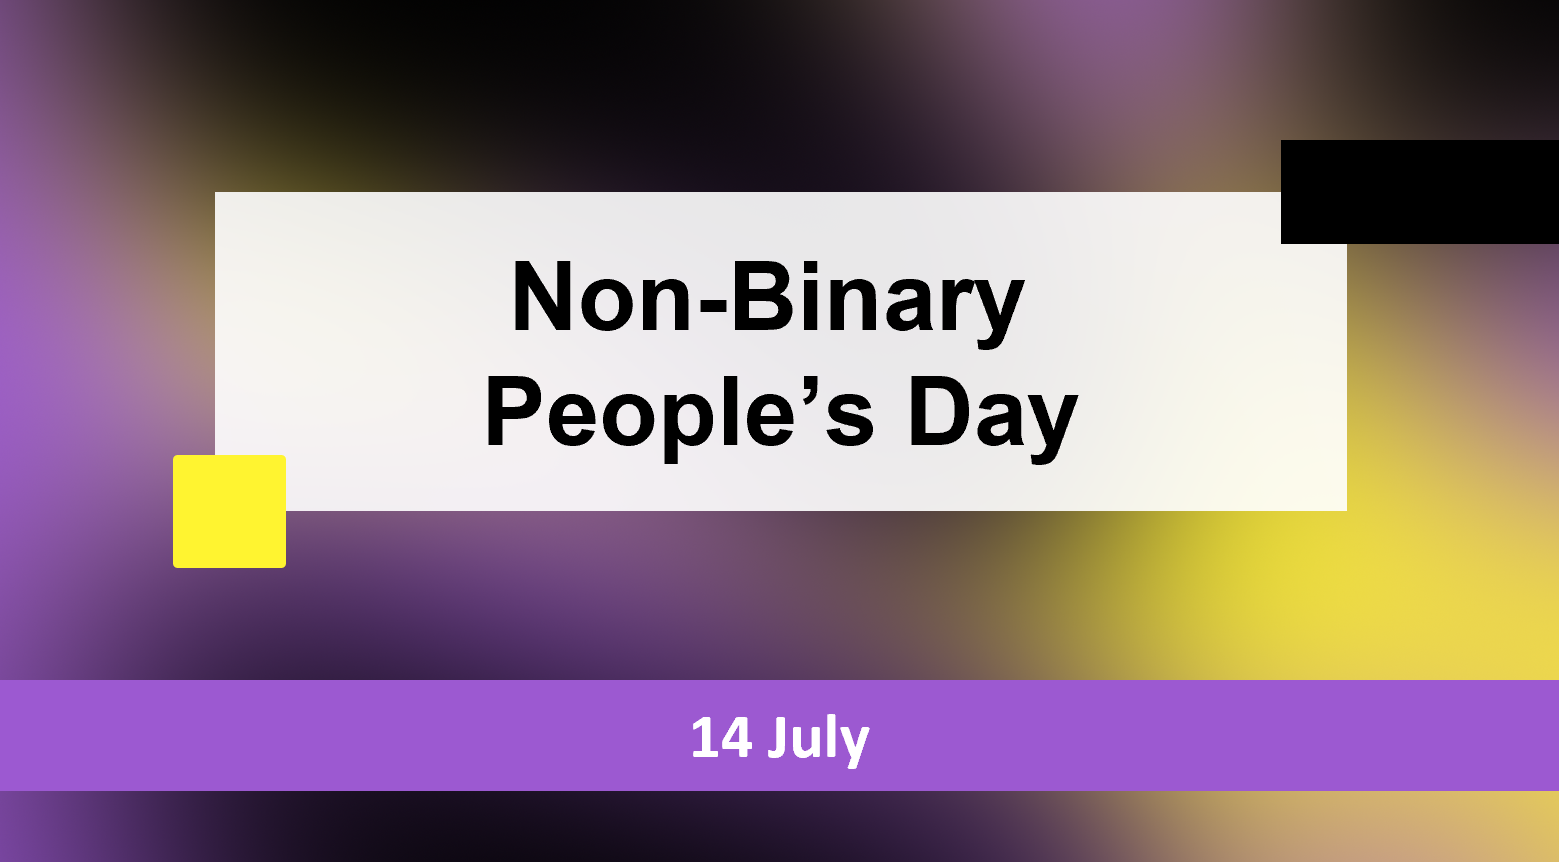 Abstract non-binary flag, overlaid with "Non-Binary People's Day" 